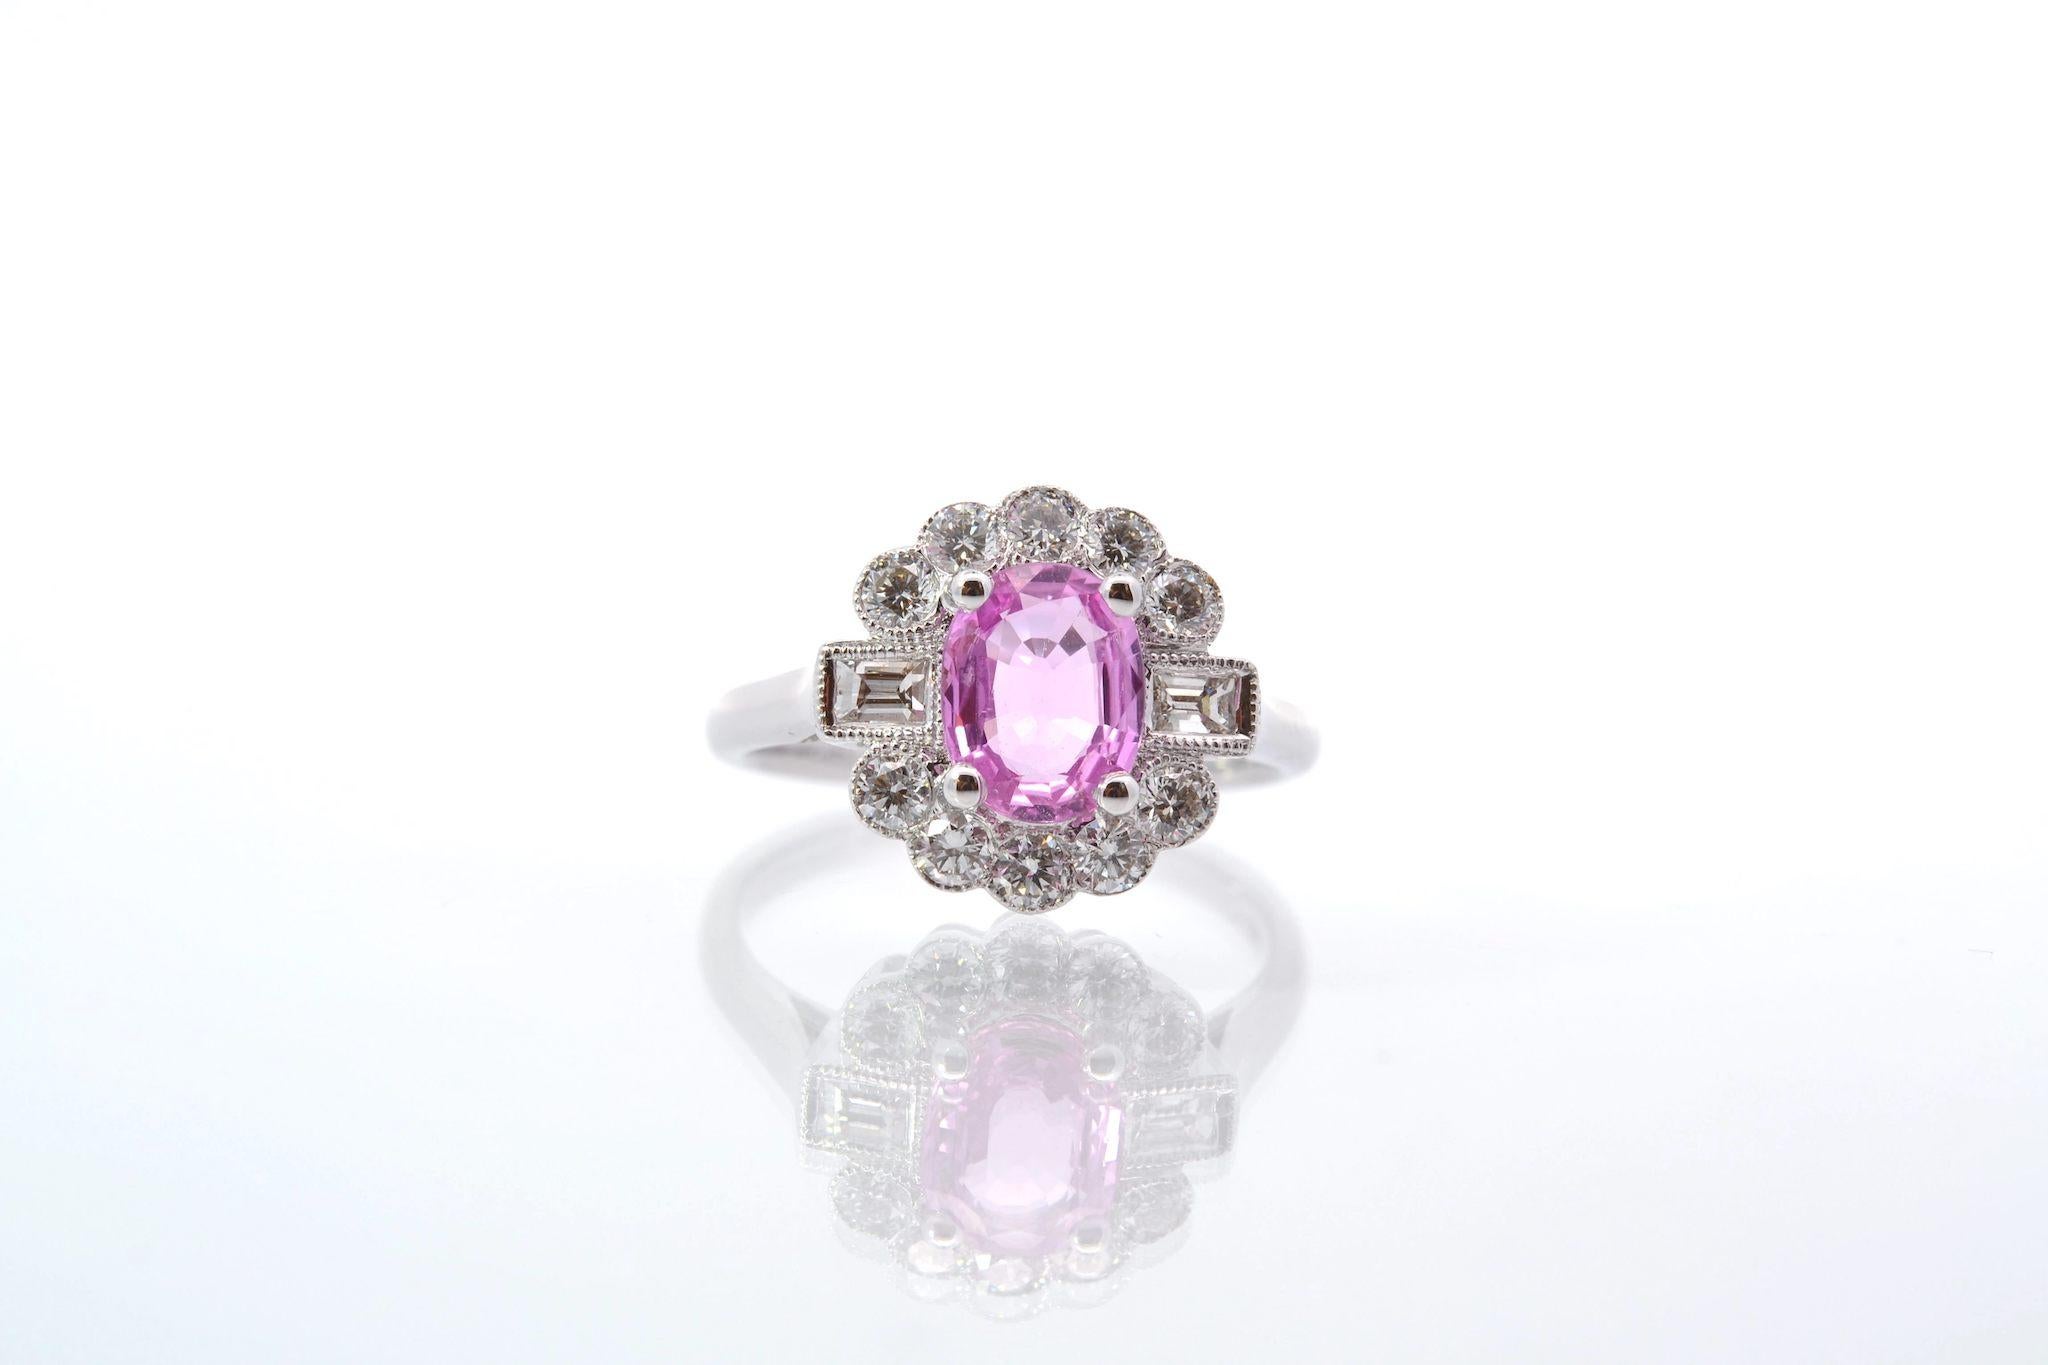 Stones: 1 pink sapphire of 1.28ct, 10 round diamonds: 0.45ct, 2 baguette diamonds: 0.22ct
Material: 18k white gold
Dimensions: 1.3cm
Weight: 4.3g
Period: Recent vintage style
Size: 52 (free sizing)
Certificate
Ref. : 25429 25445